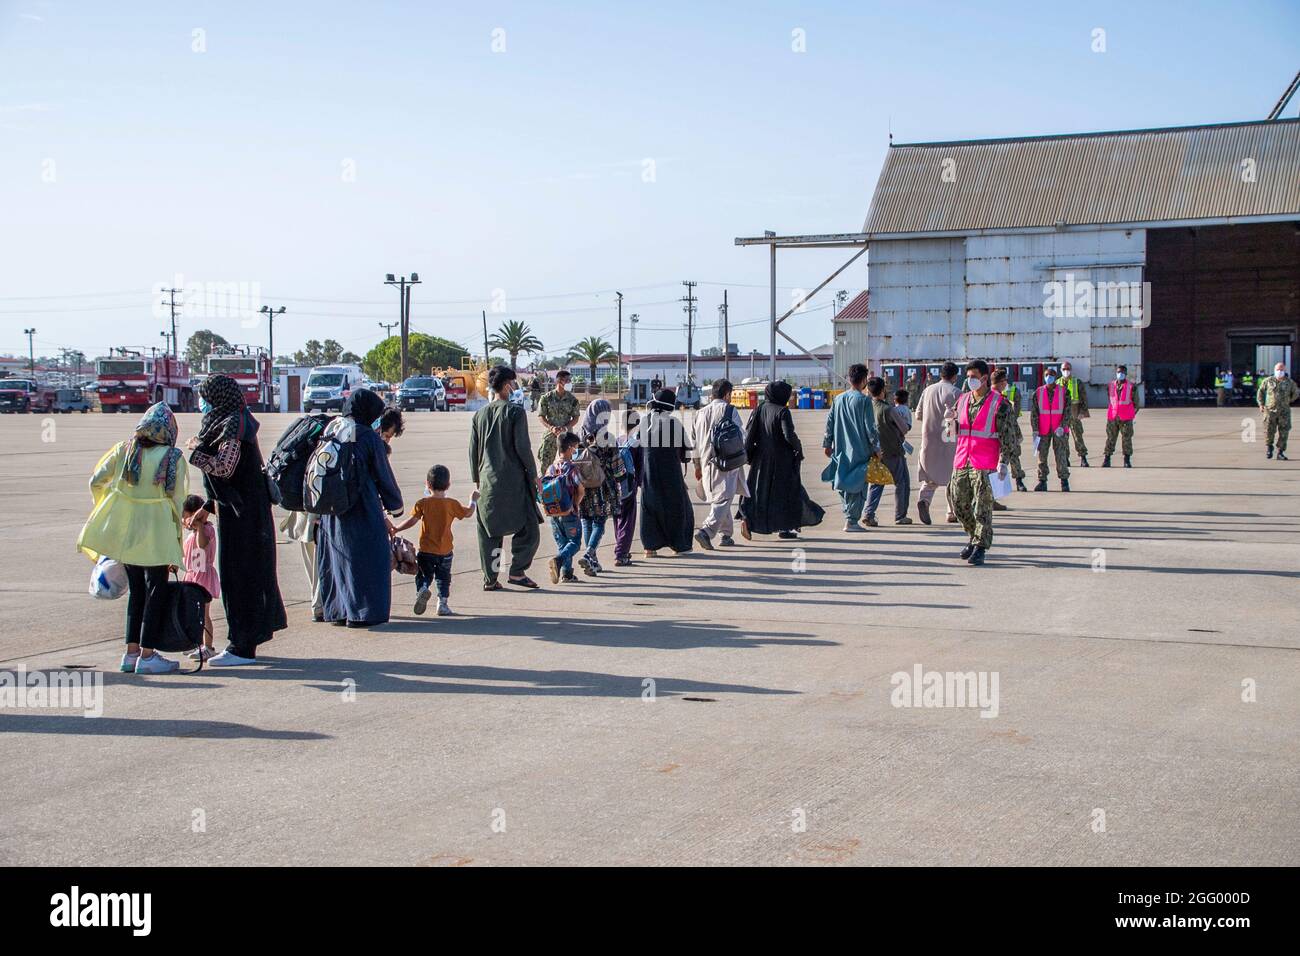 Rota, Spain. 27th Aug, 2021. U.S. Navy sailors assist Afghan refugees evacuated from Kabul on arrival at Naval Station Rota August 27, 2021 in Rota, Spain. NS Rota is providing temporary lodging for evacuees from Afghanistan as part of Operation Allies Refuge. Credit: Planetpix/Alamy Live News Stock Photo